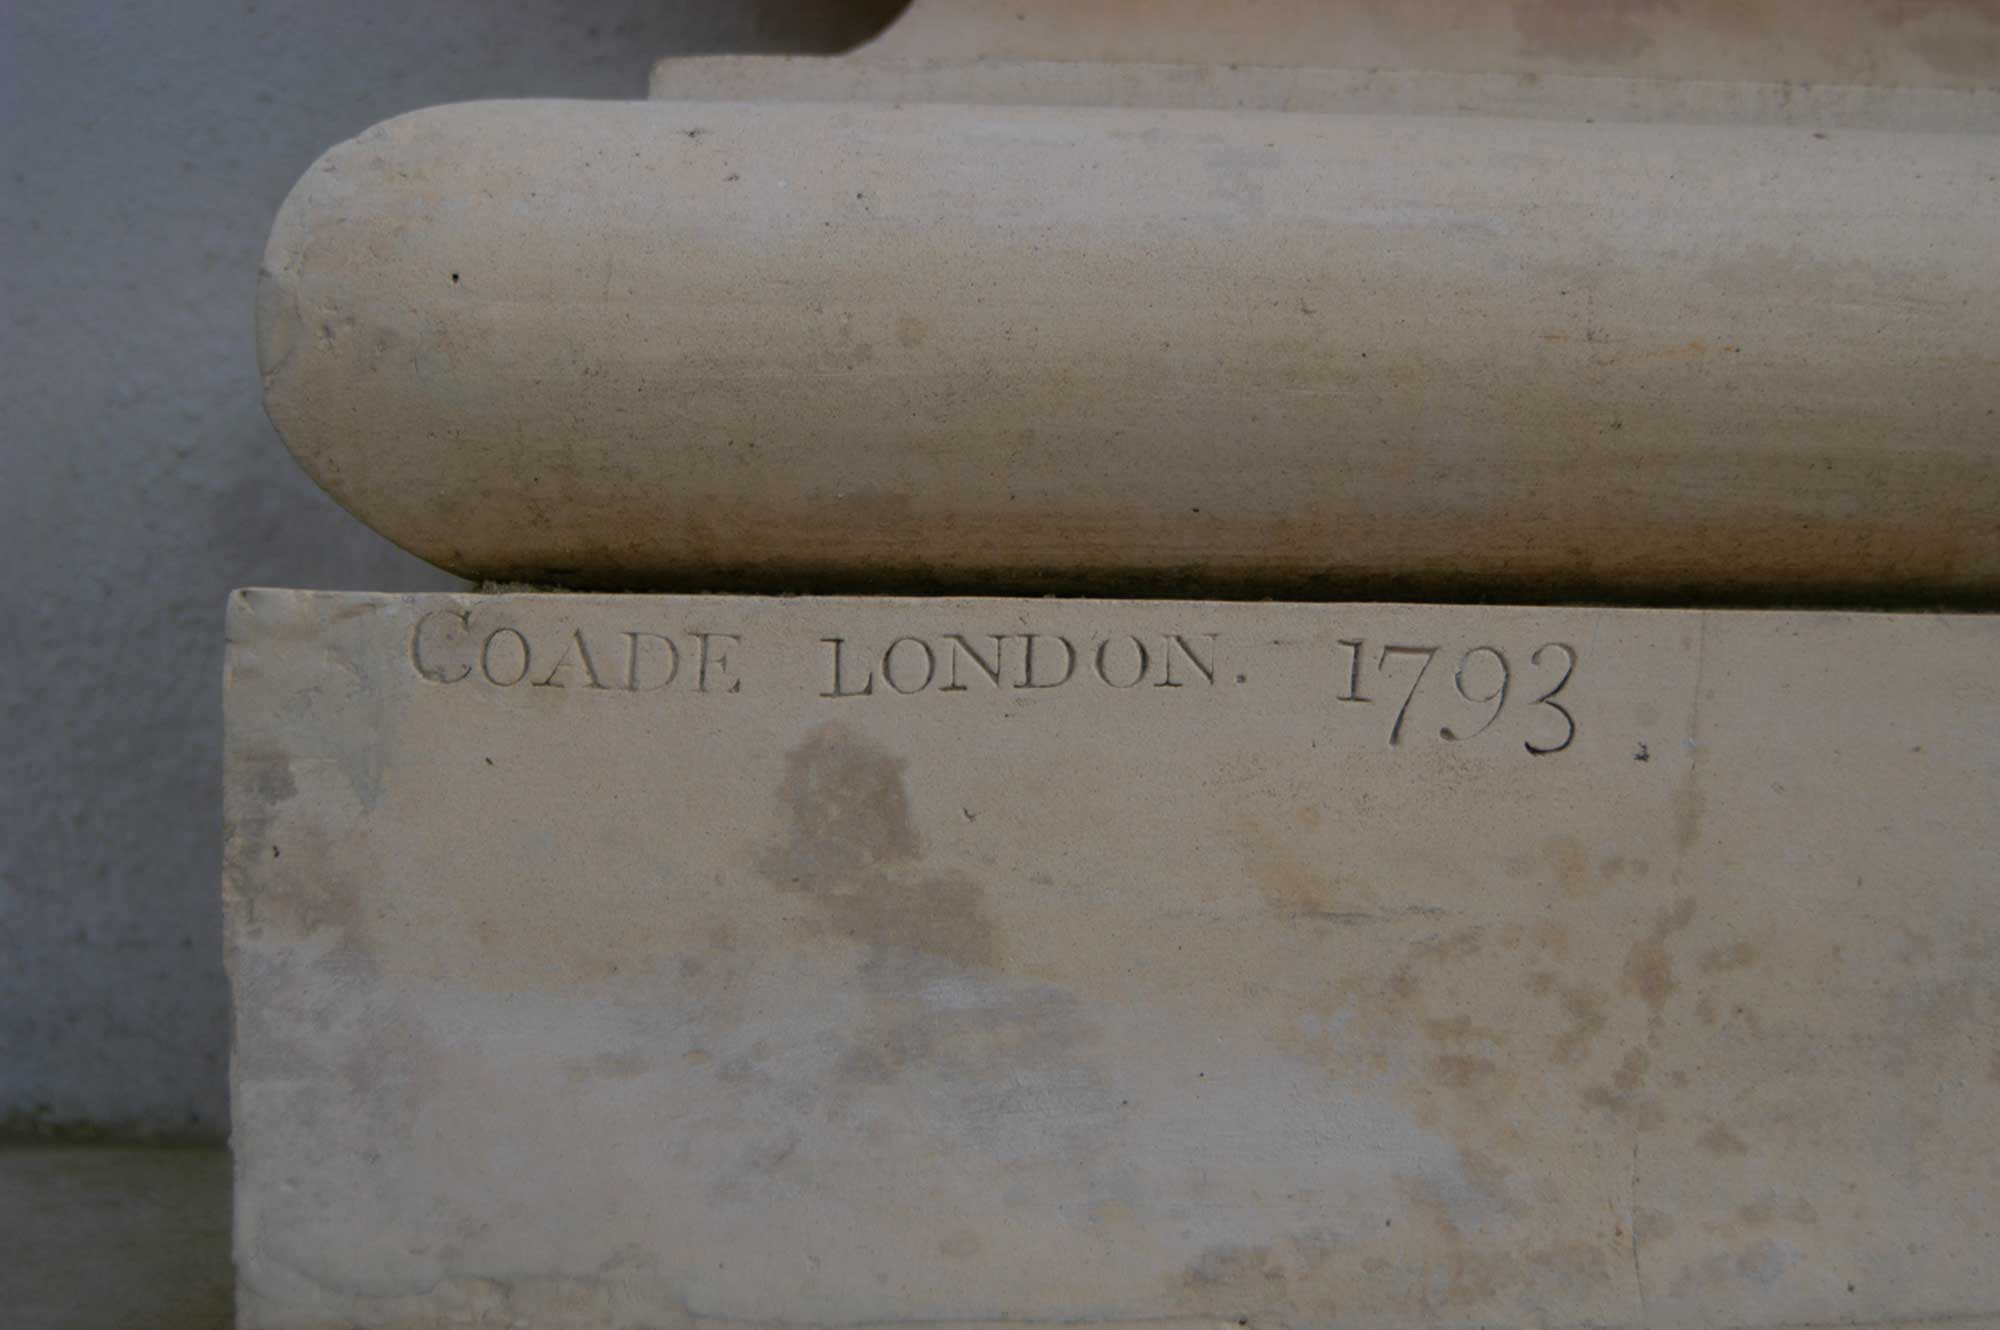 Coade London 1793 stamped on the stone